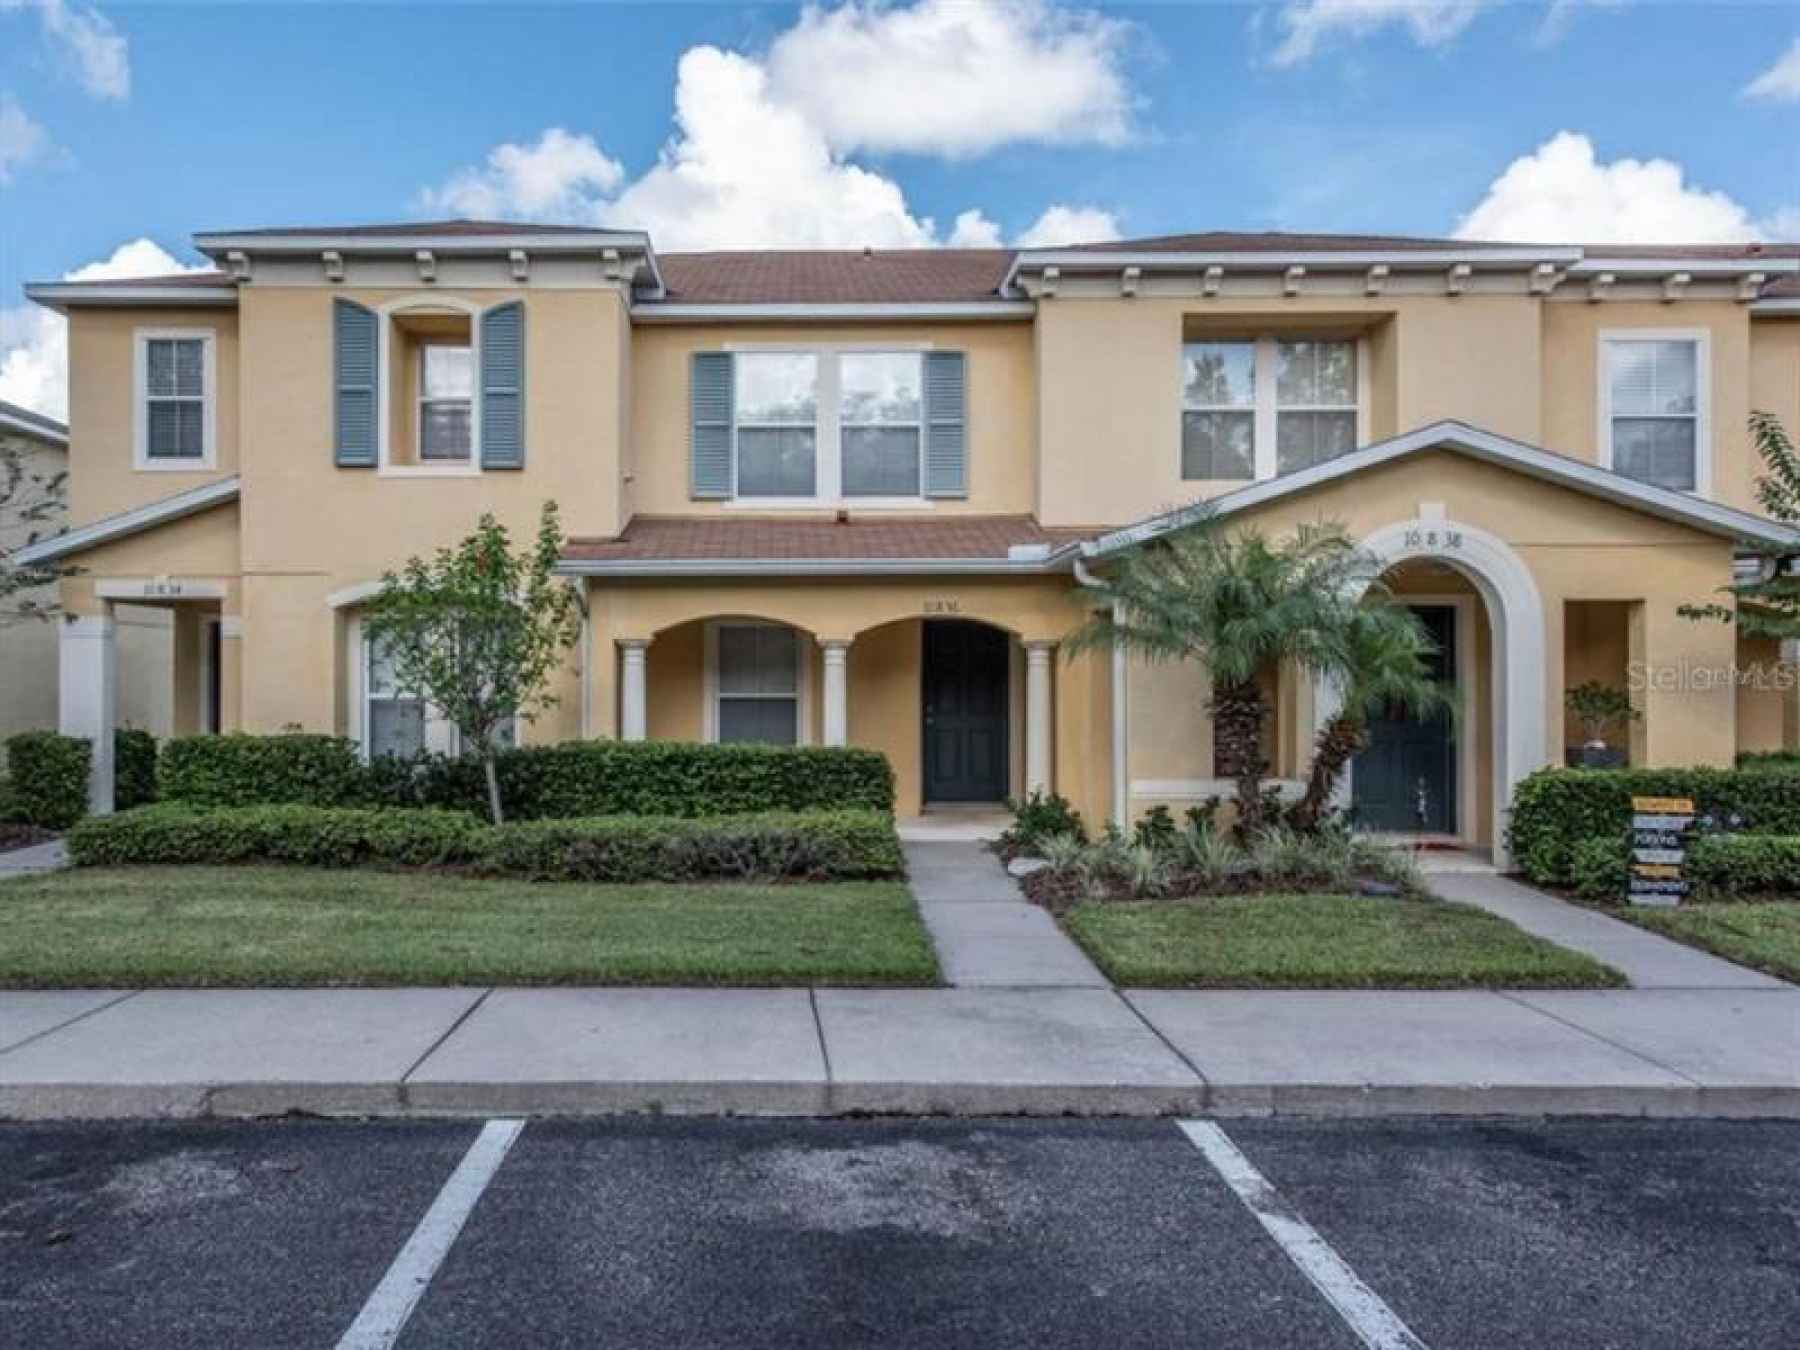 2 bedroom, 2-1/2 bath center unit townhome with tile in the wet areas and laminate flooring througho